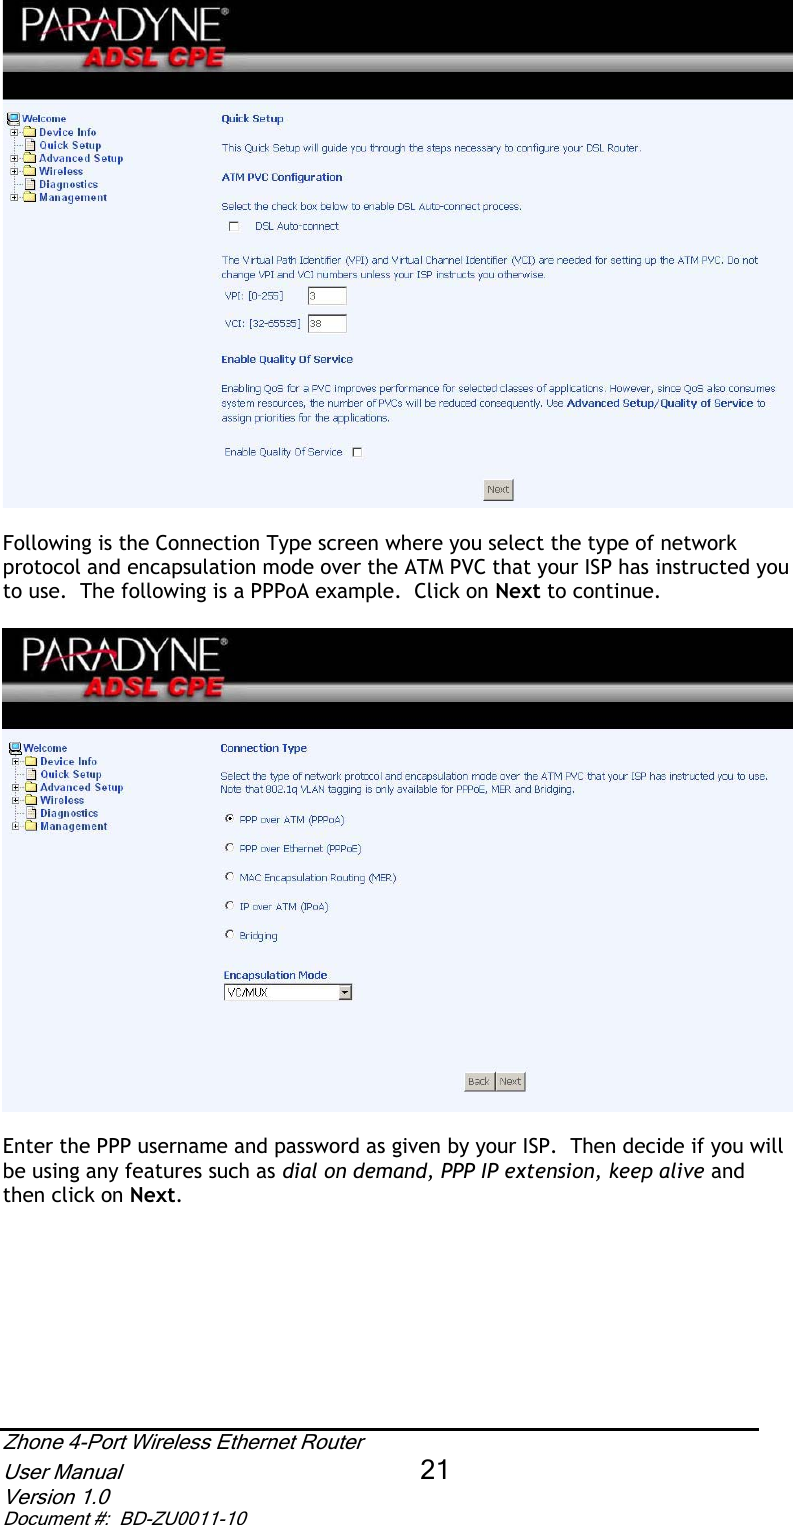 Following is the Connection Type screen where you select the type of network protocol and encapsulation mode over the ATM PVC that your ISP has instructed you to use.  The following is a PPPoA example.  Click on Next to continue. Enter the PPP username and password as given by your ISP.  Then decide if you will be using any features such as dial on demand, PPP IP extension, keep alive and then click on Next.Zhone 4-Port Wireless Ethernet Router User Manual 21Version 1.0 Document #:  BD-ZU0011-10